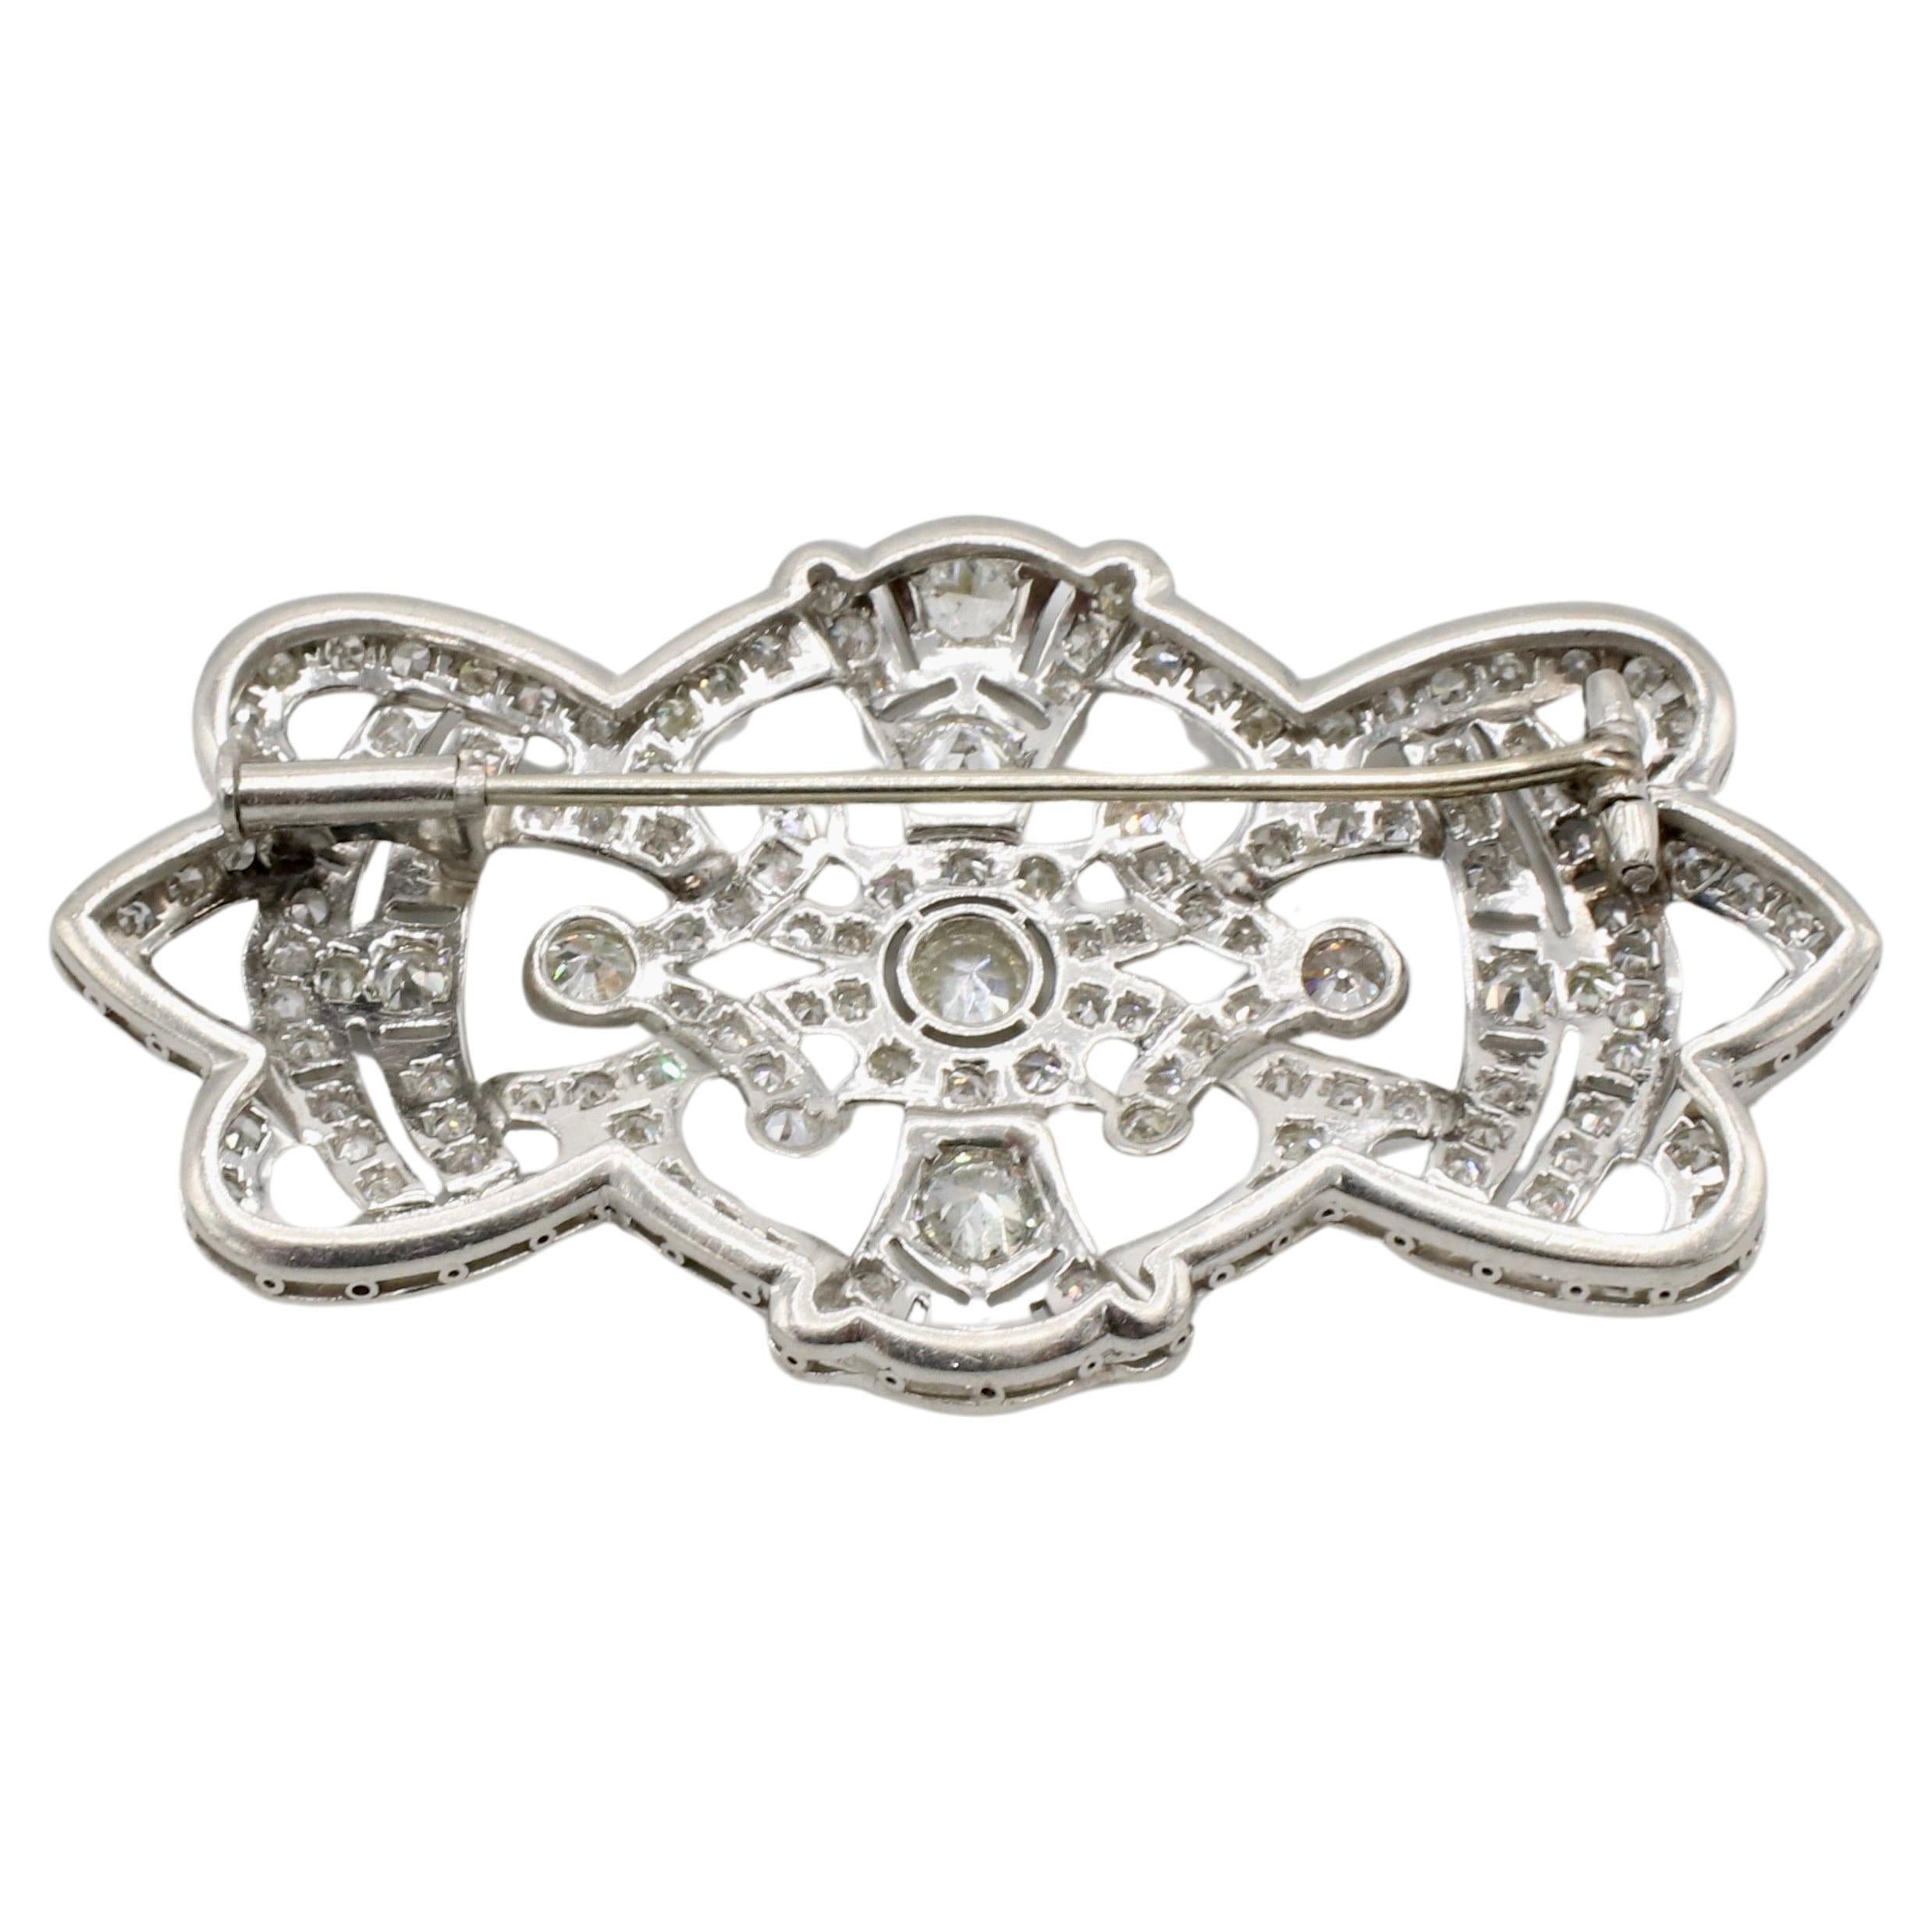 Art Deco Platinum Natural Diamond Brooch Pin 
Metal: Platinum
Weight: 18.75 grams
Dimensions: 60 x 32mm
Diamonds: Approx. 4.00 carats old European cut and single cut round diamonds H-I VS-SI1
Note: No signatures or hallmarks

